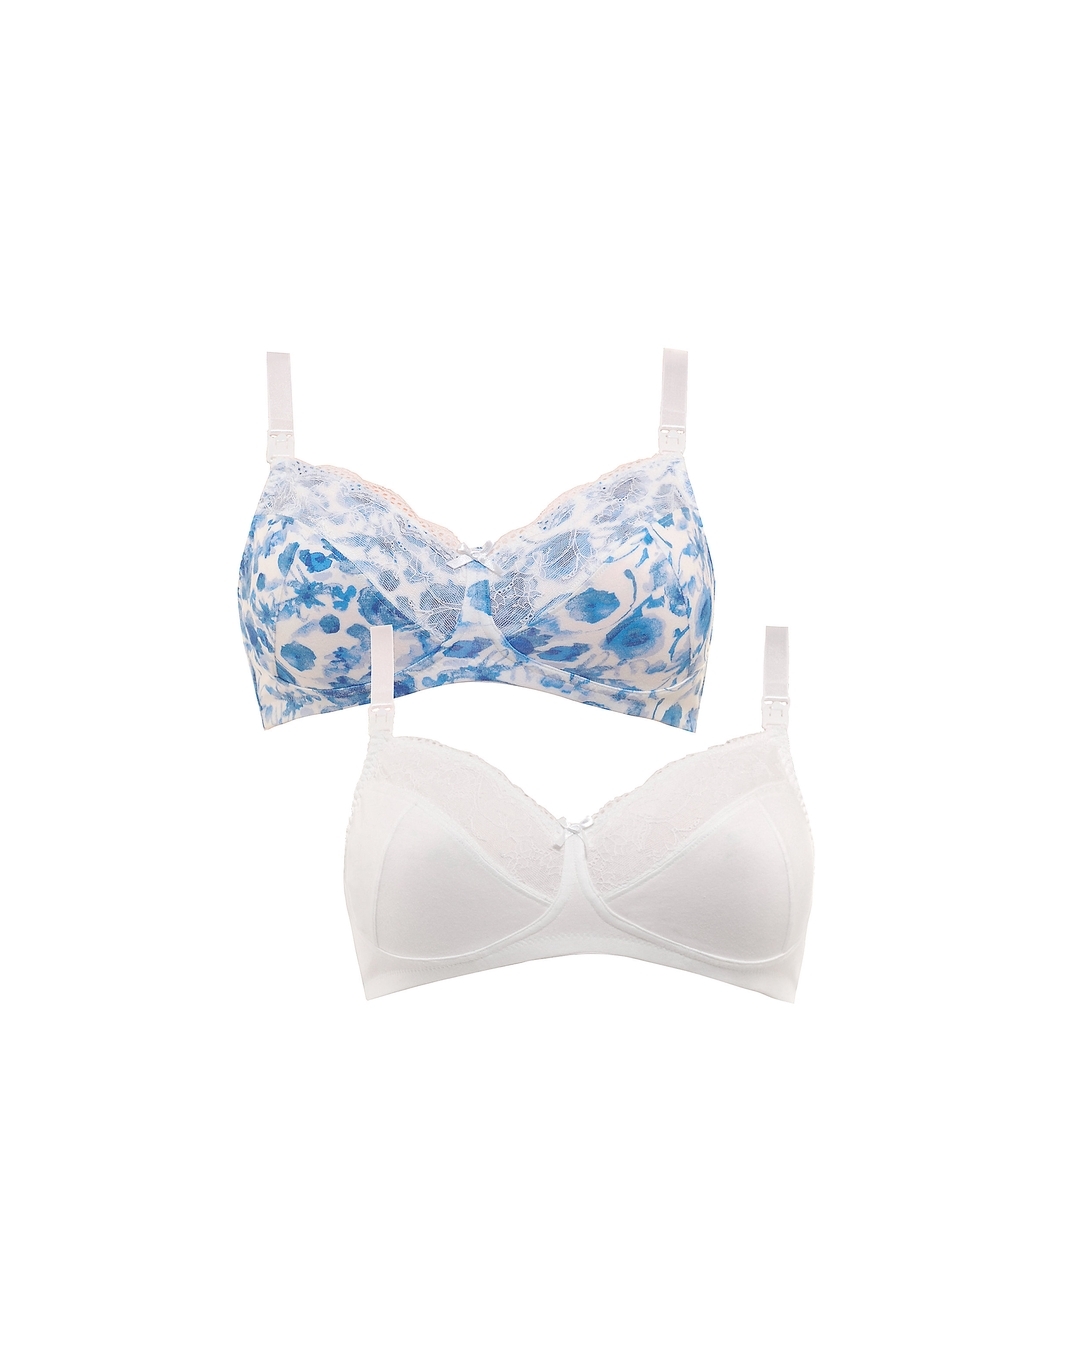 Buy MOTHERCARE Maternity Cotton Printed Bras - Pack of 2